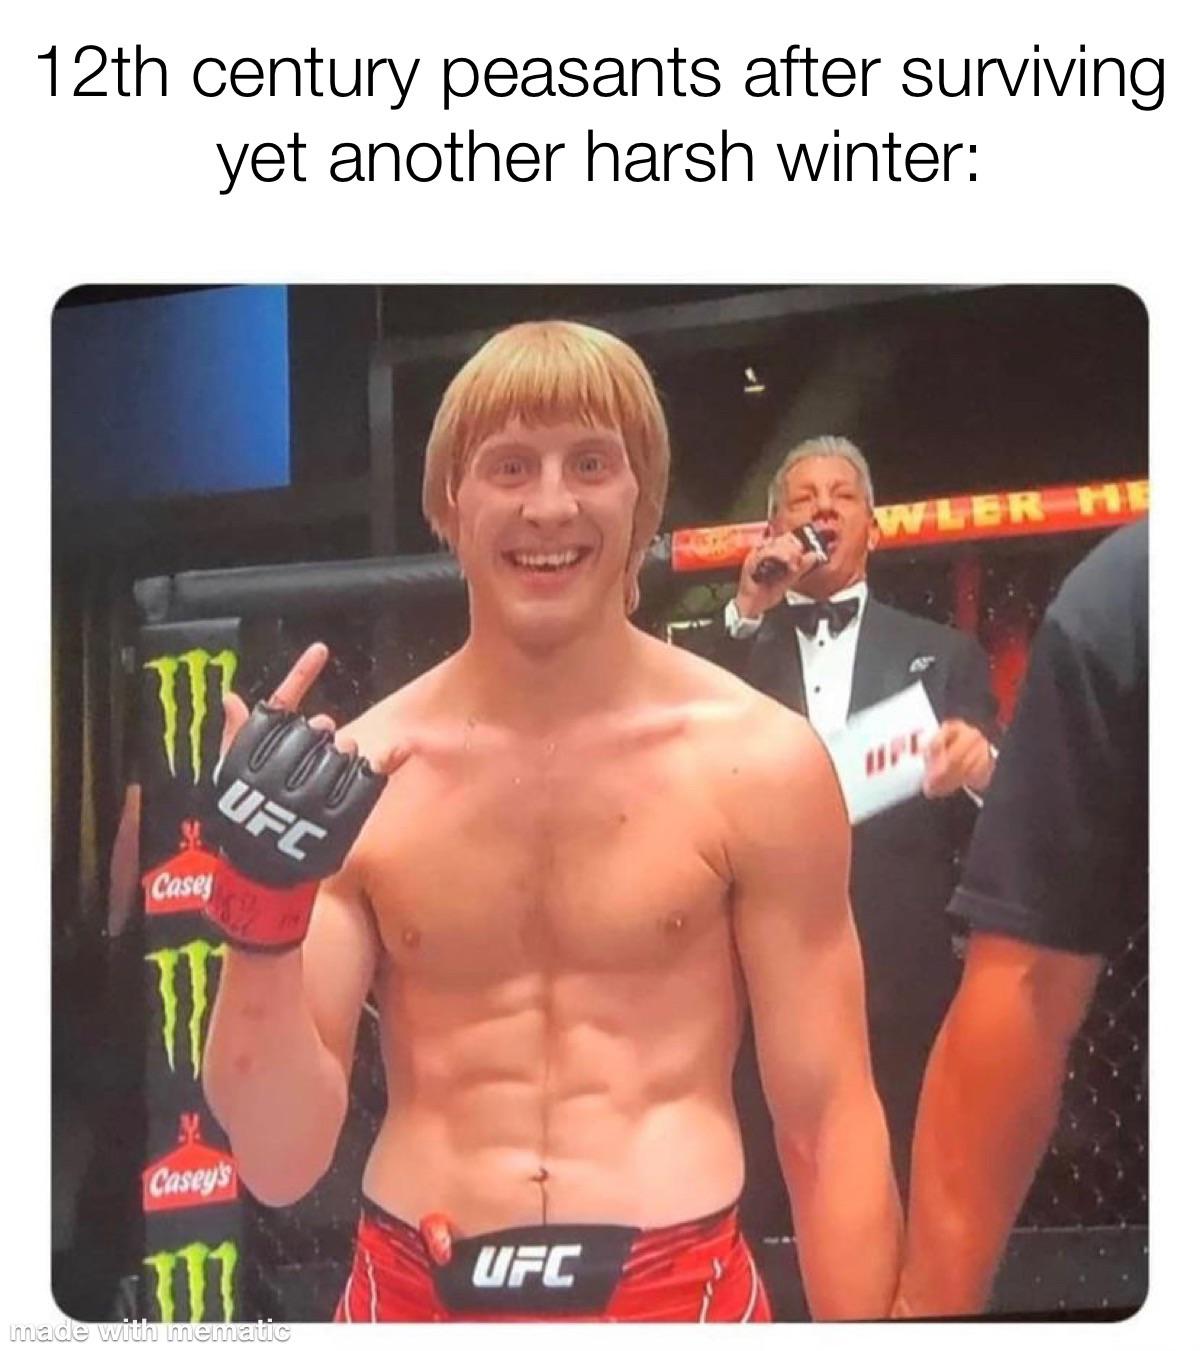 fresh memes - 15th century peasant after surviving - 12th century peasants after surviving yet another harsh winter Wler Me Ufc Cases Casey's Ufc made with mematic